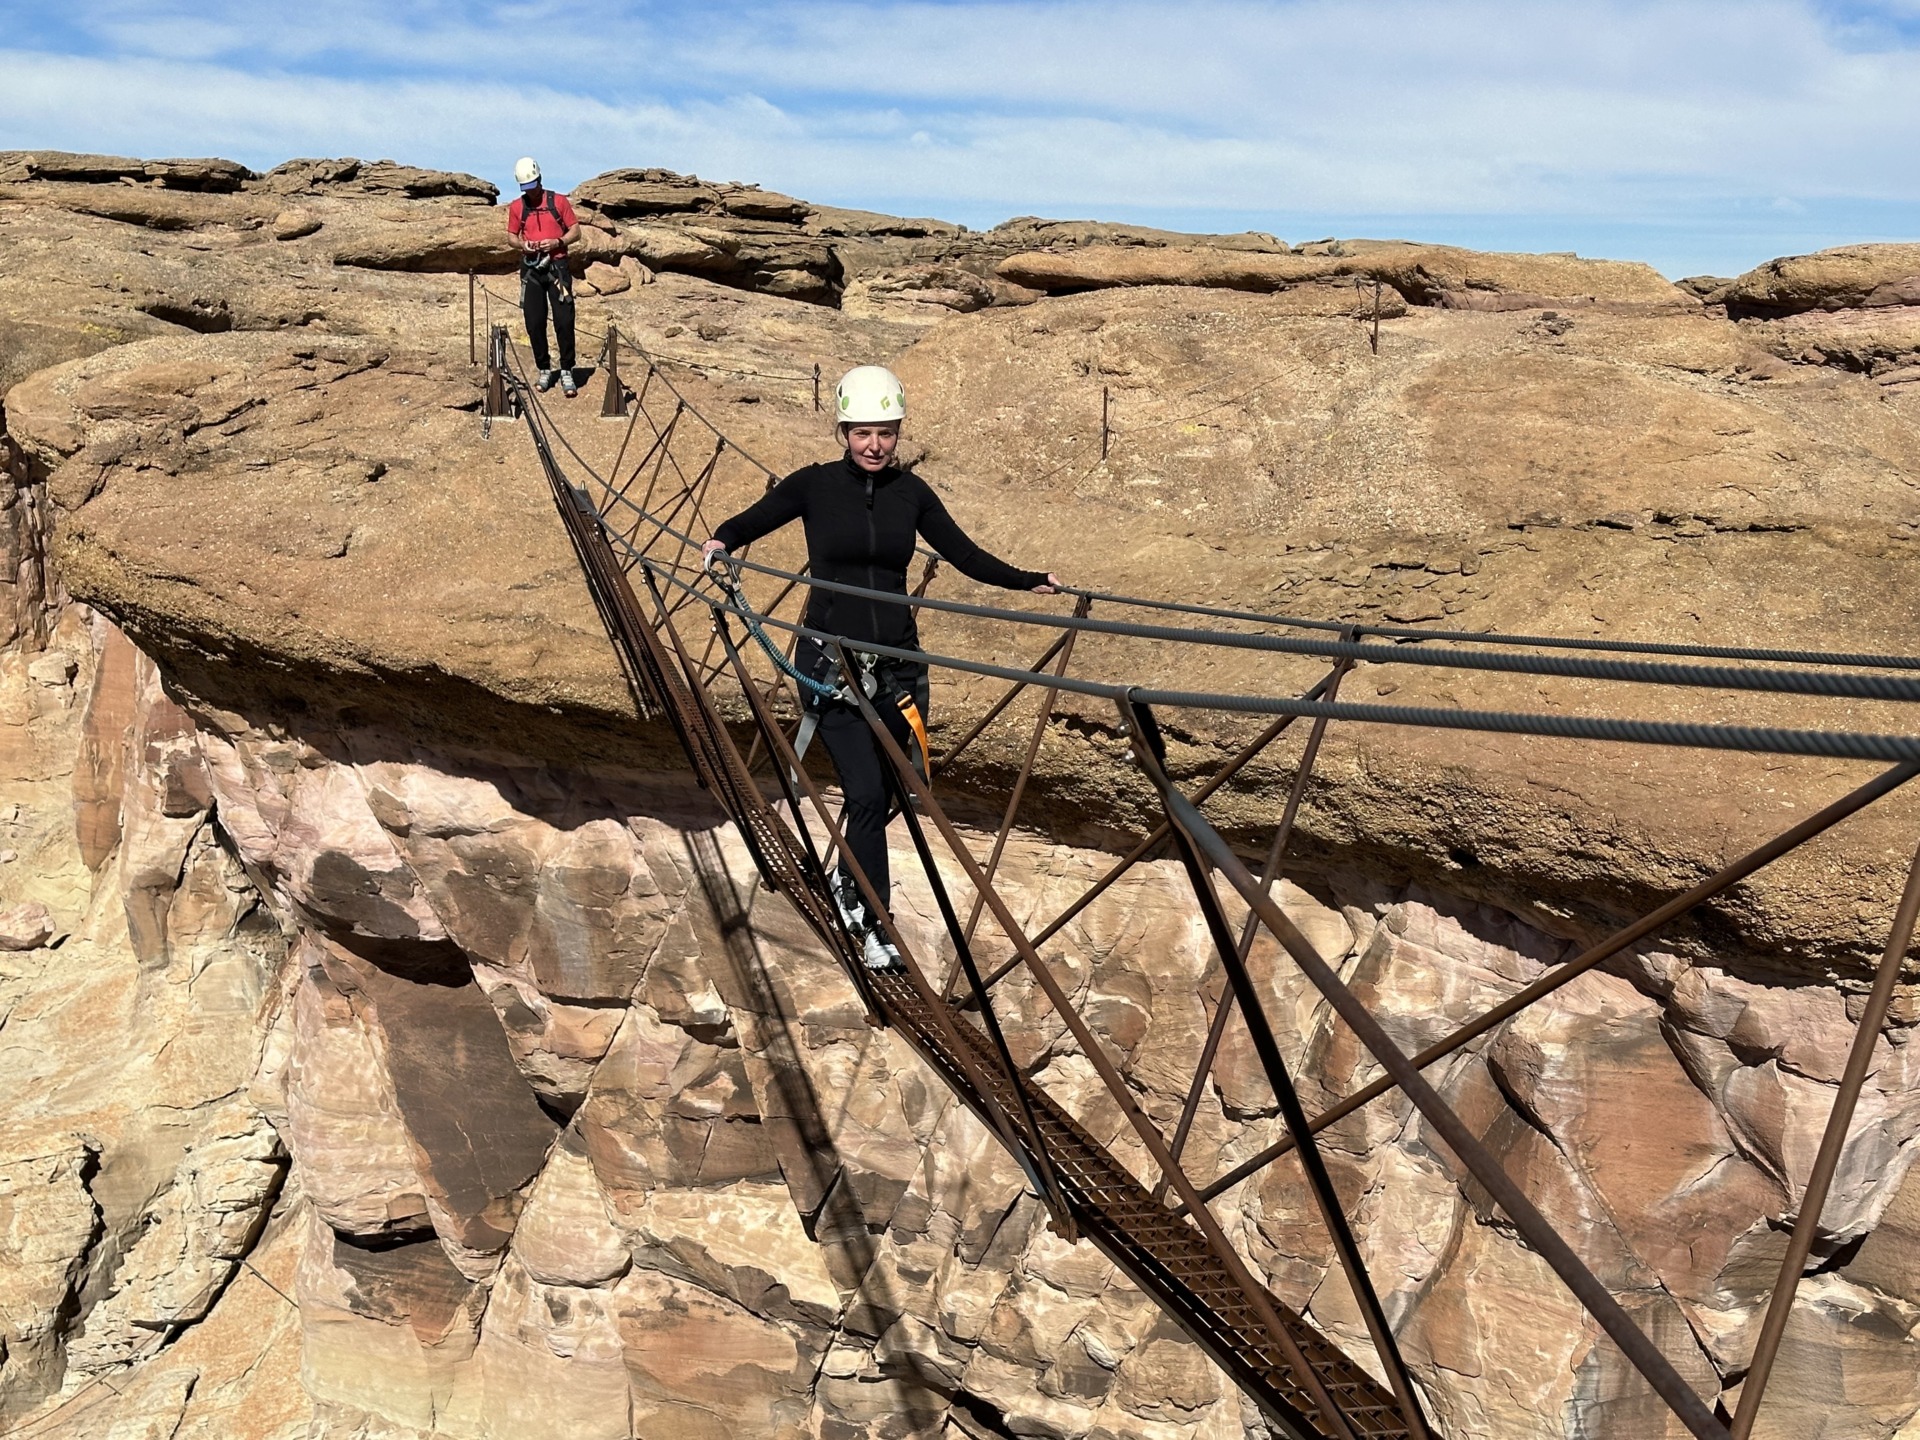 We Need To Talk About Conquering Your Fears, overcoming fears, finding inner strength in facing your fears, Erin Busbee, Busbee style, fashion over 40, Canyon Point, UT, Amangiri Resort